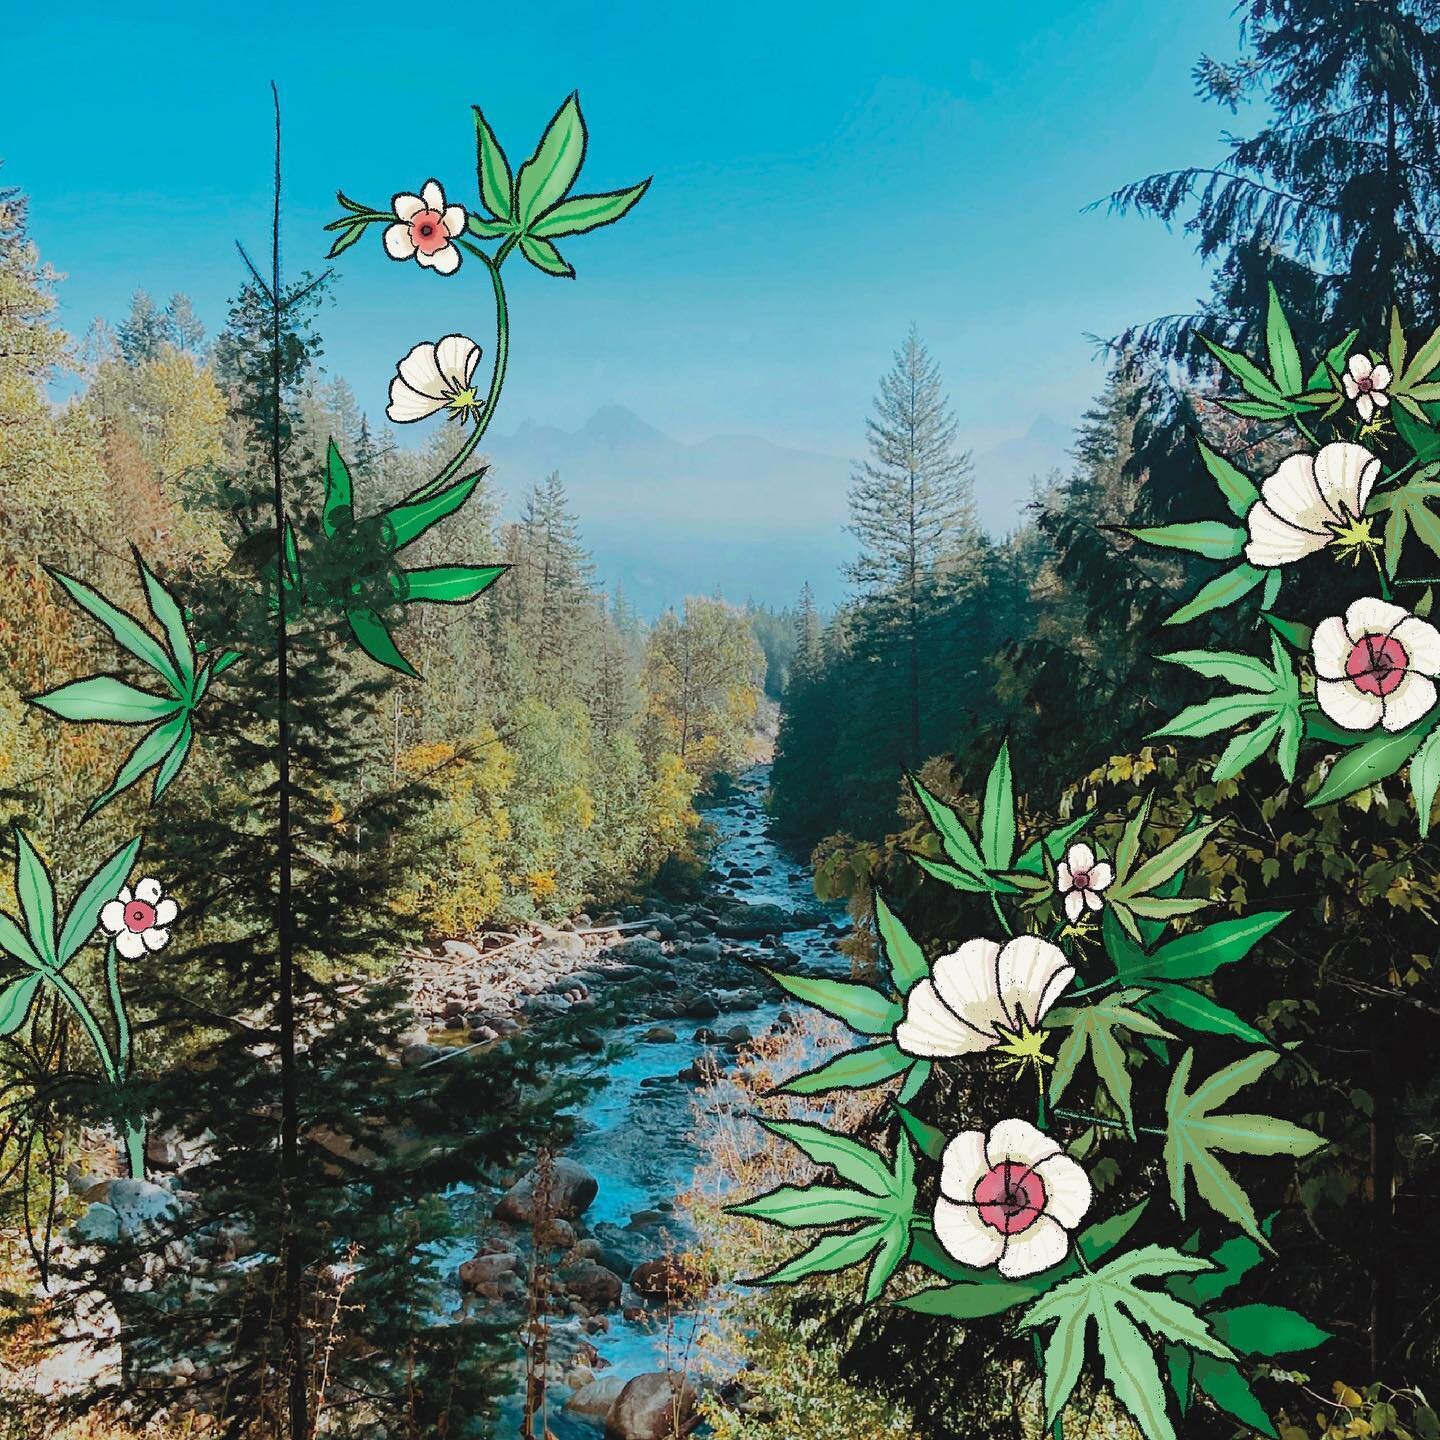 Fun little spring mixed media piece for @woody.nelson.cannabis 🌸🌱
.
.
.
.
#woodynelson #cannabisart #spring #blooming #flowers #bcnature #Kaslo